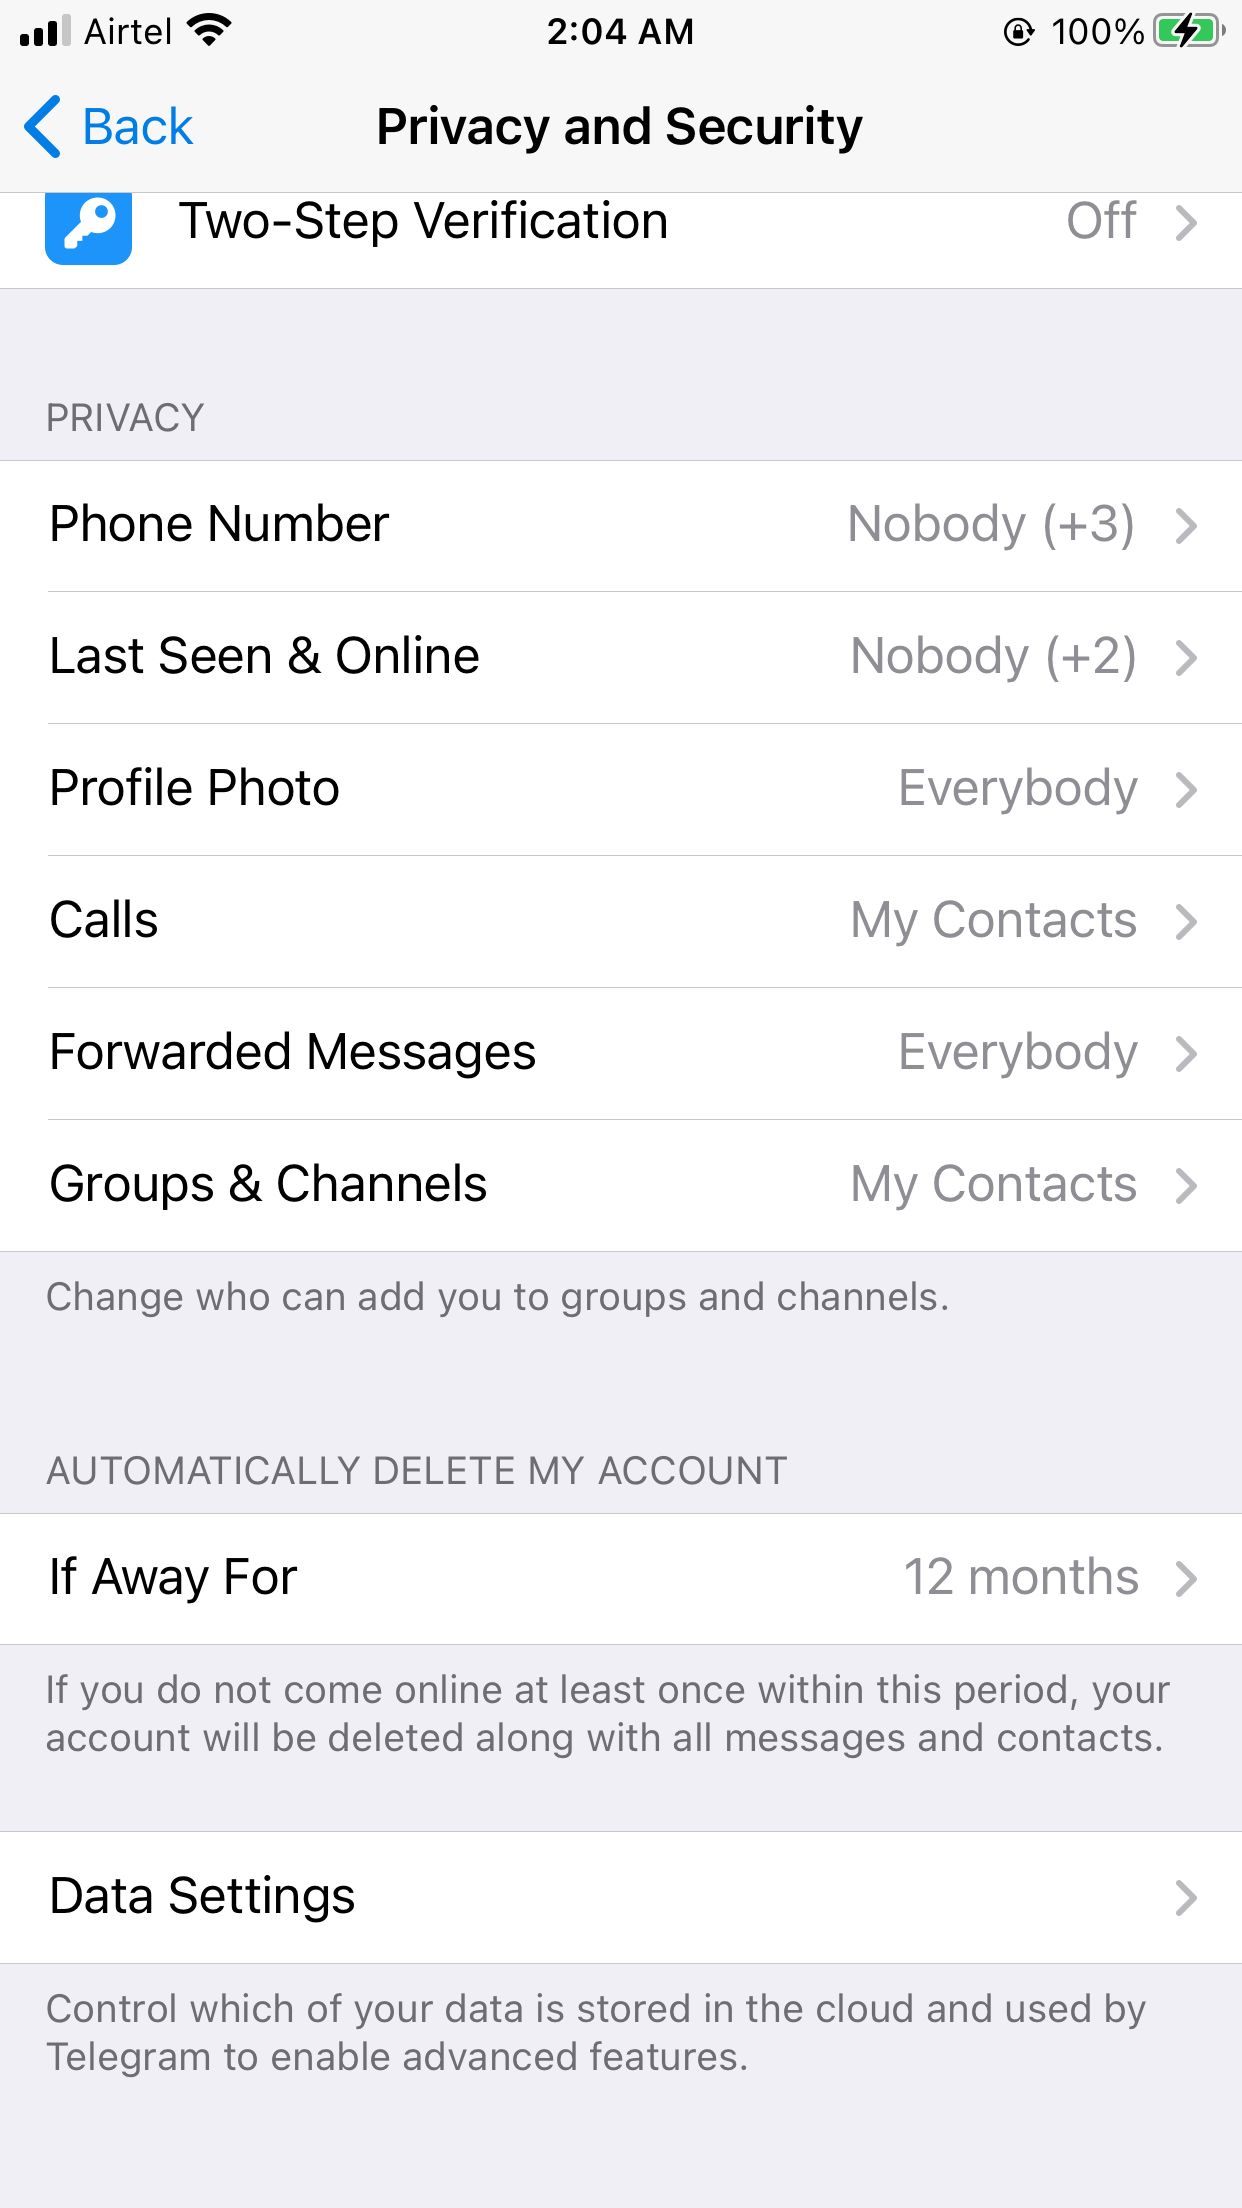 Data Settings in Privacy and Security in Telegram iOS